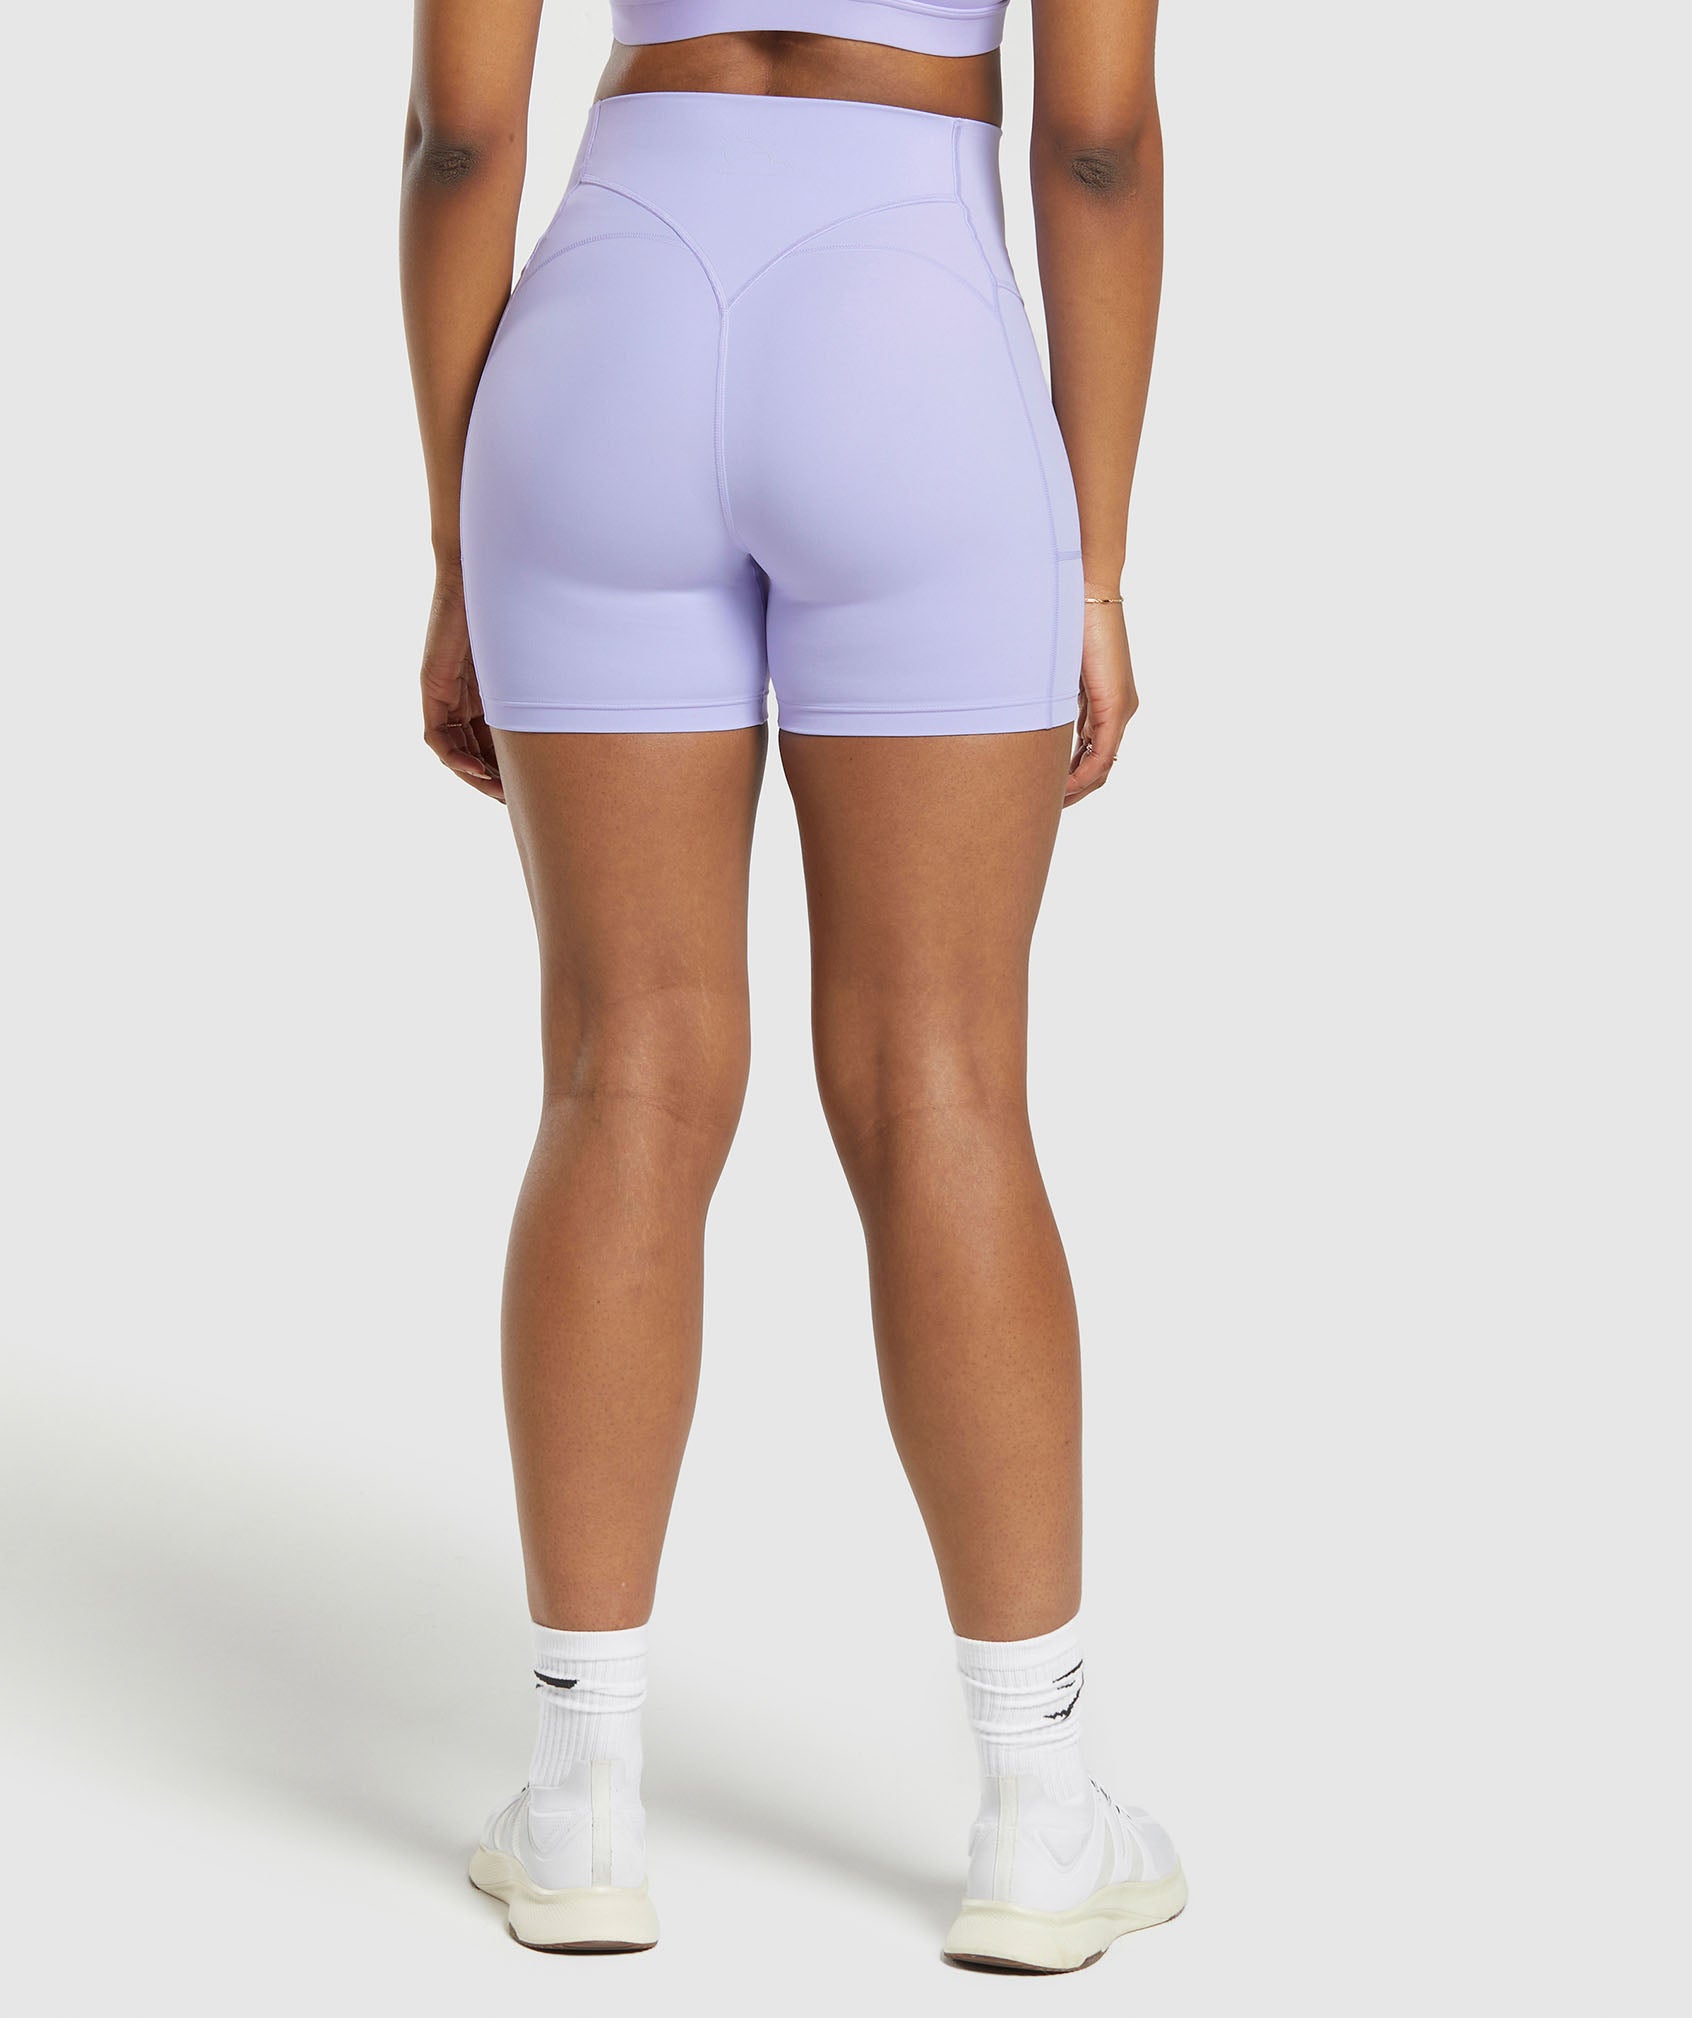 GS x Libby Shorts in Powdered Lilac - view 2